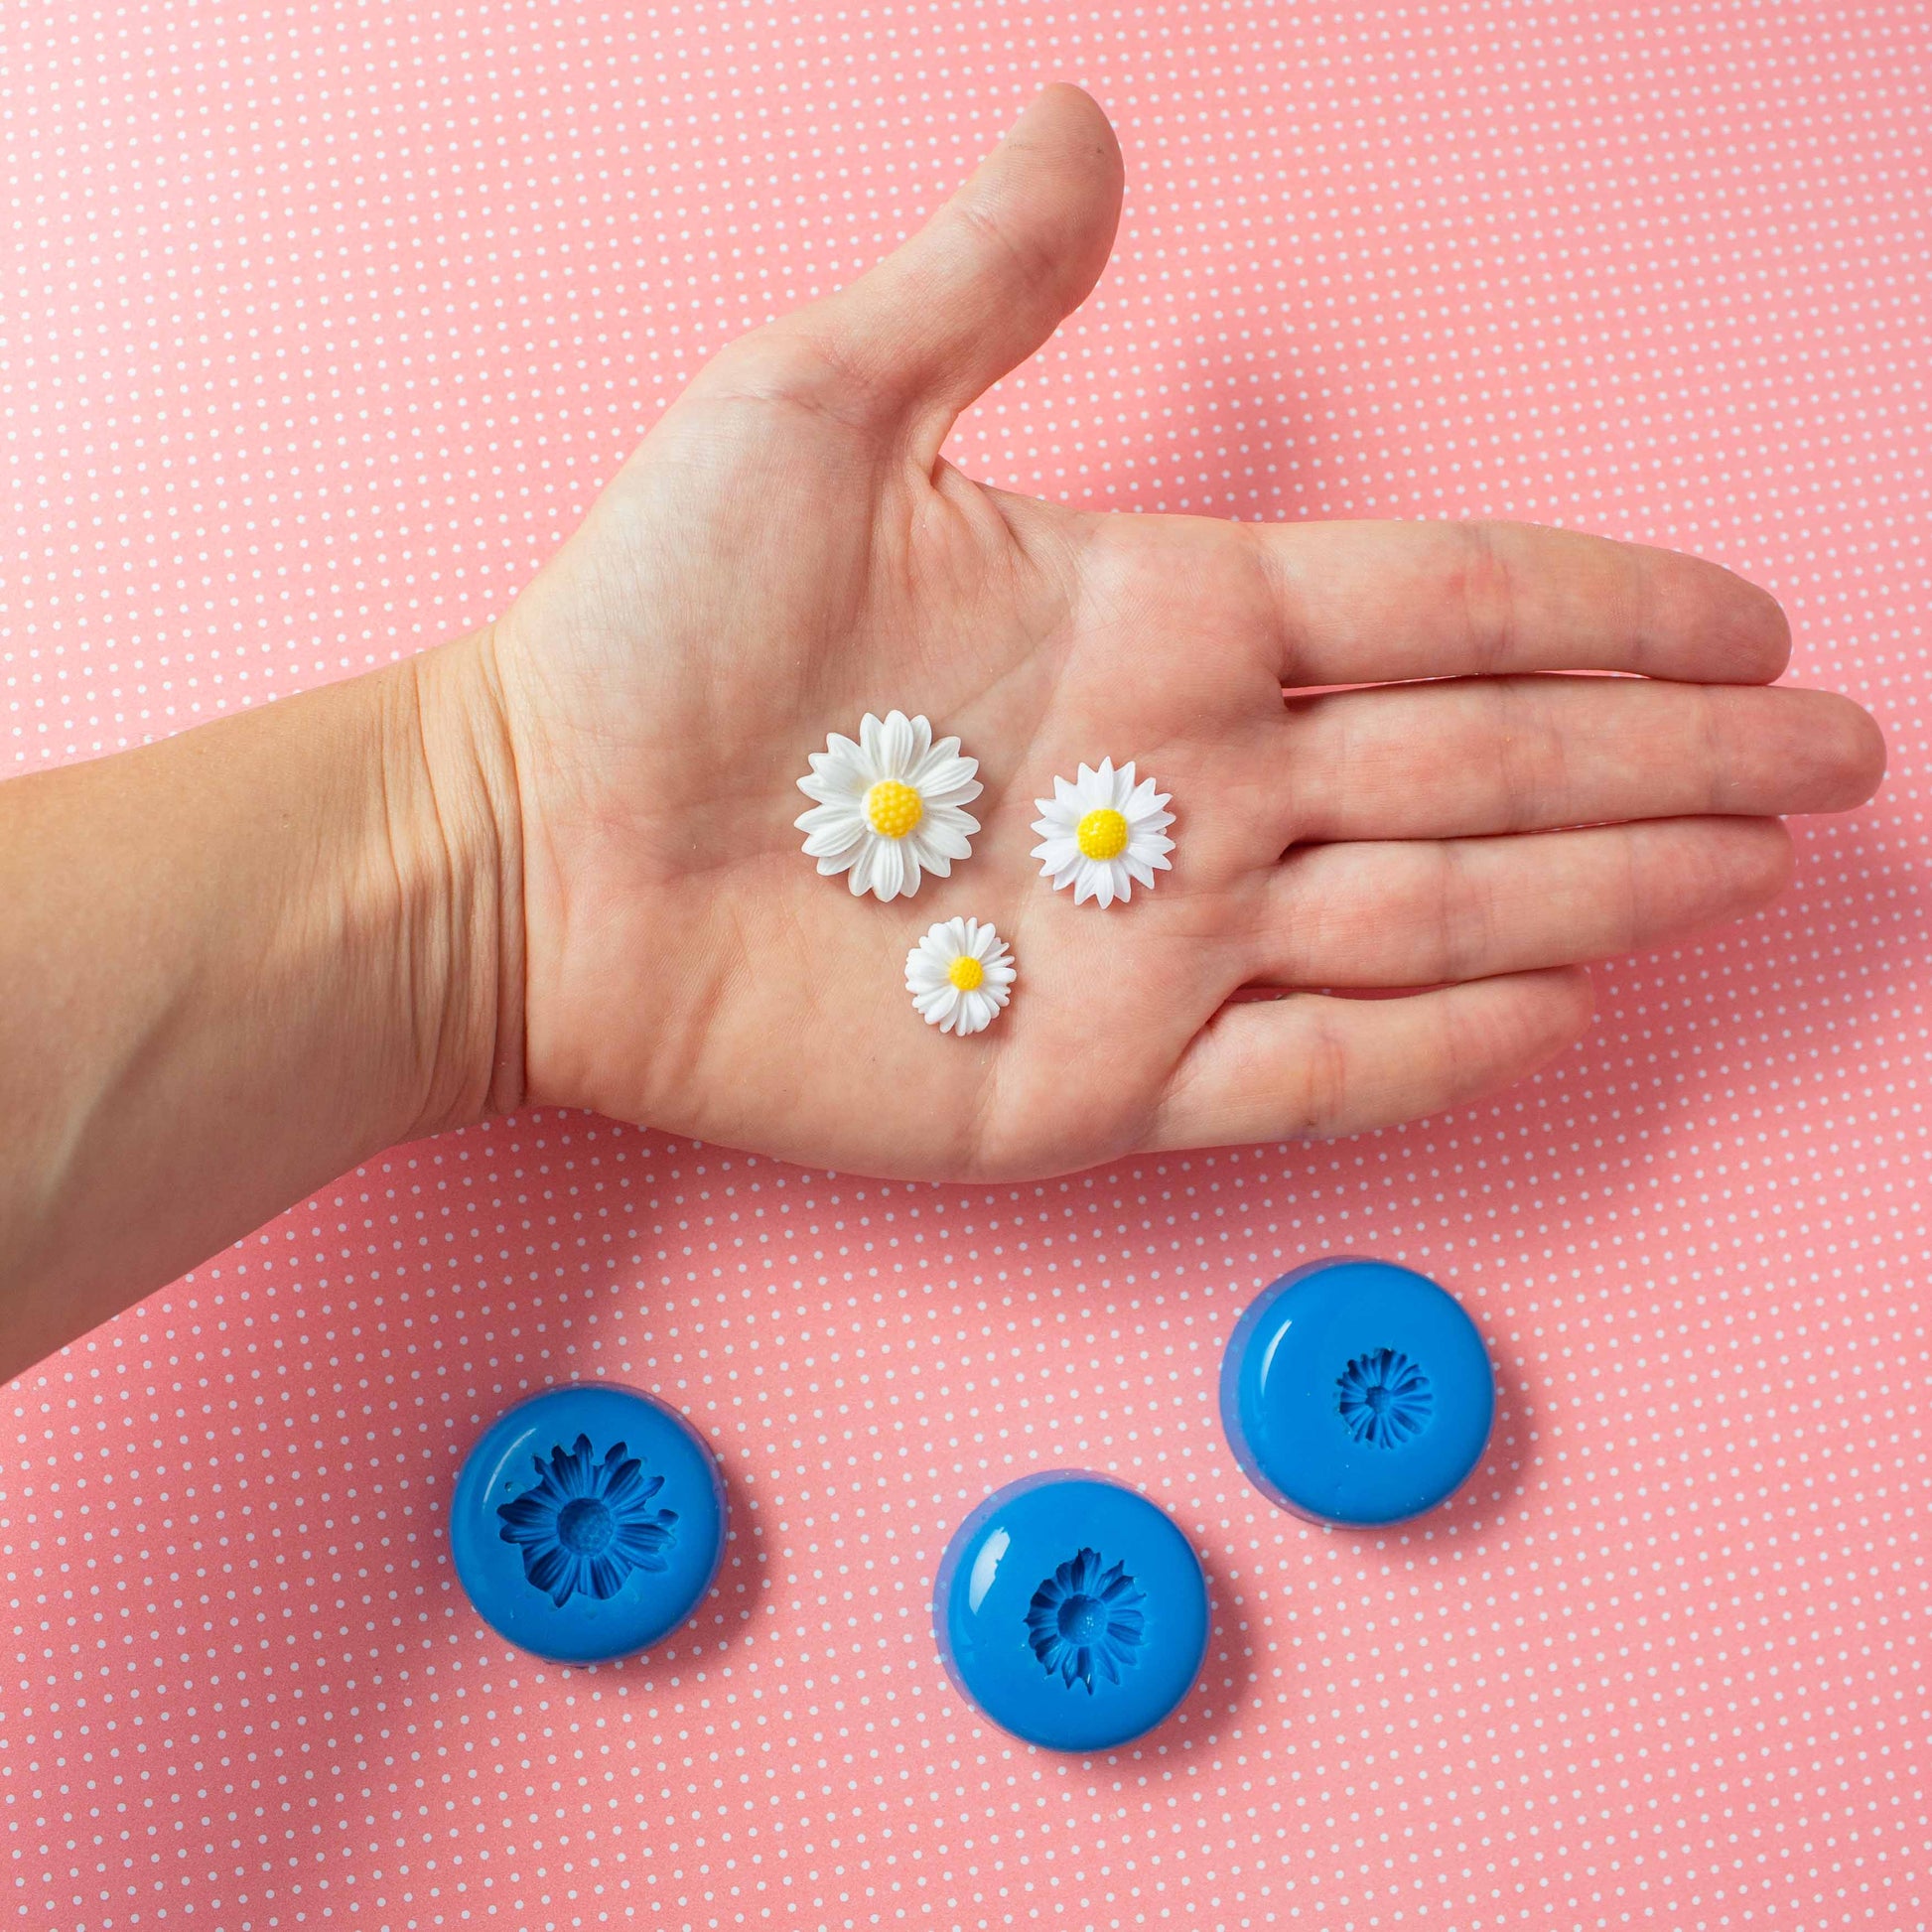 3 daizies on a hand and a set of 3 flower silicone molds in a pink polka dots background.